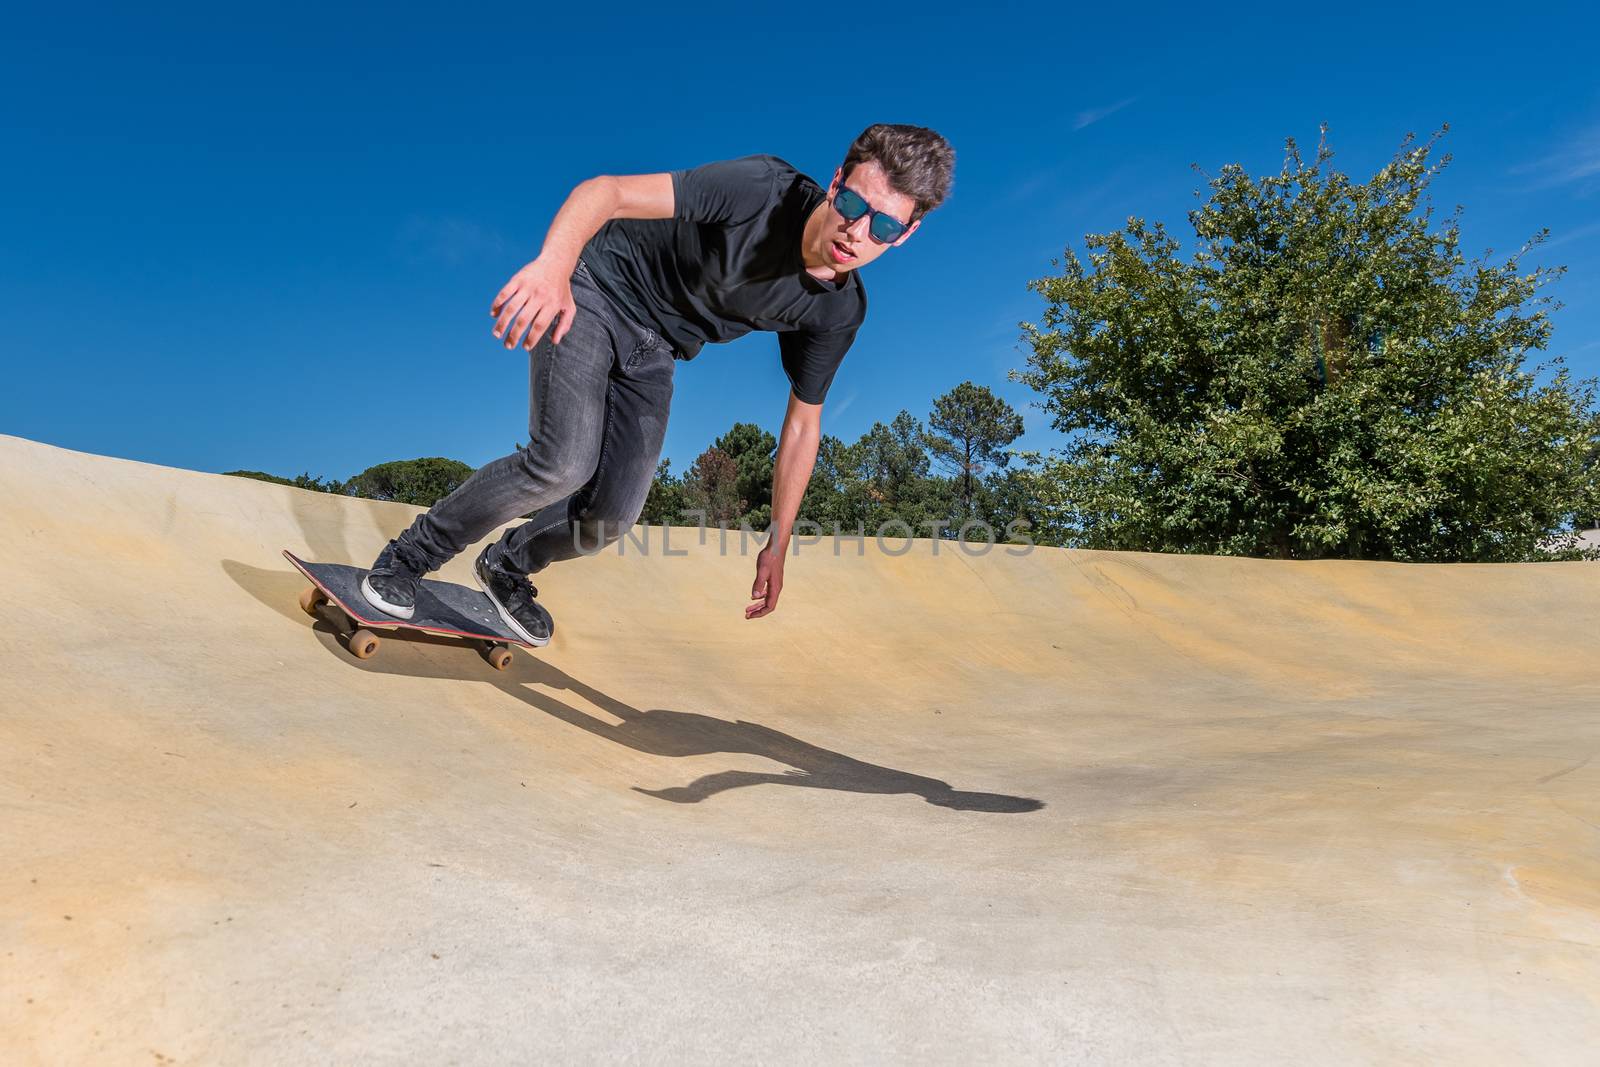 Skateboarder practice on a pump track park on a sunny summer day.